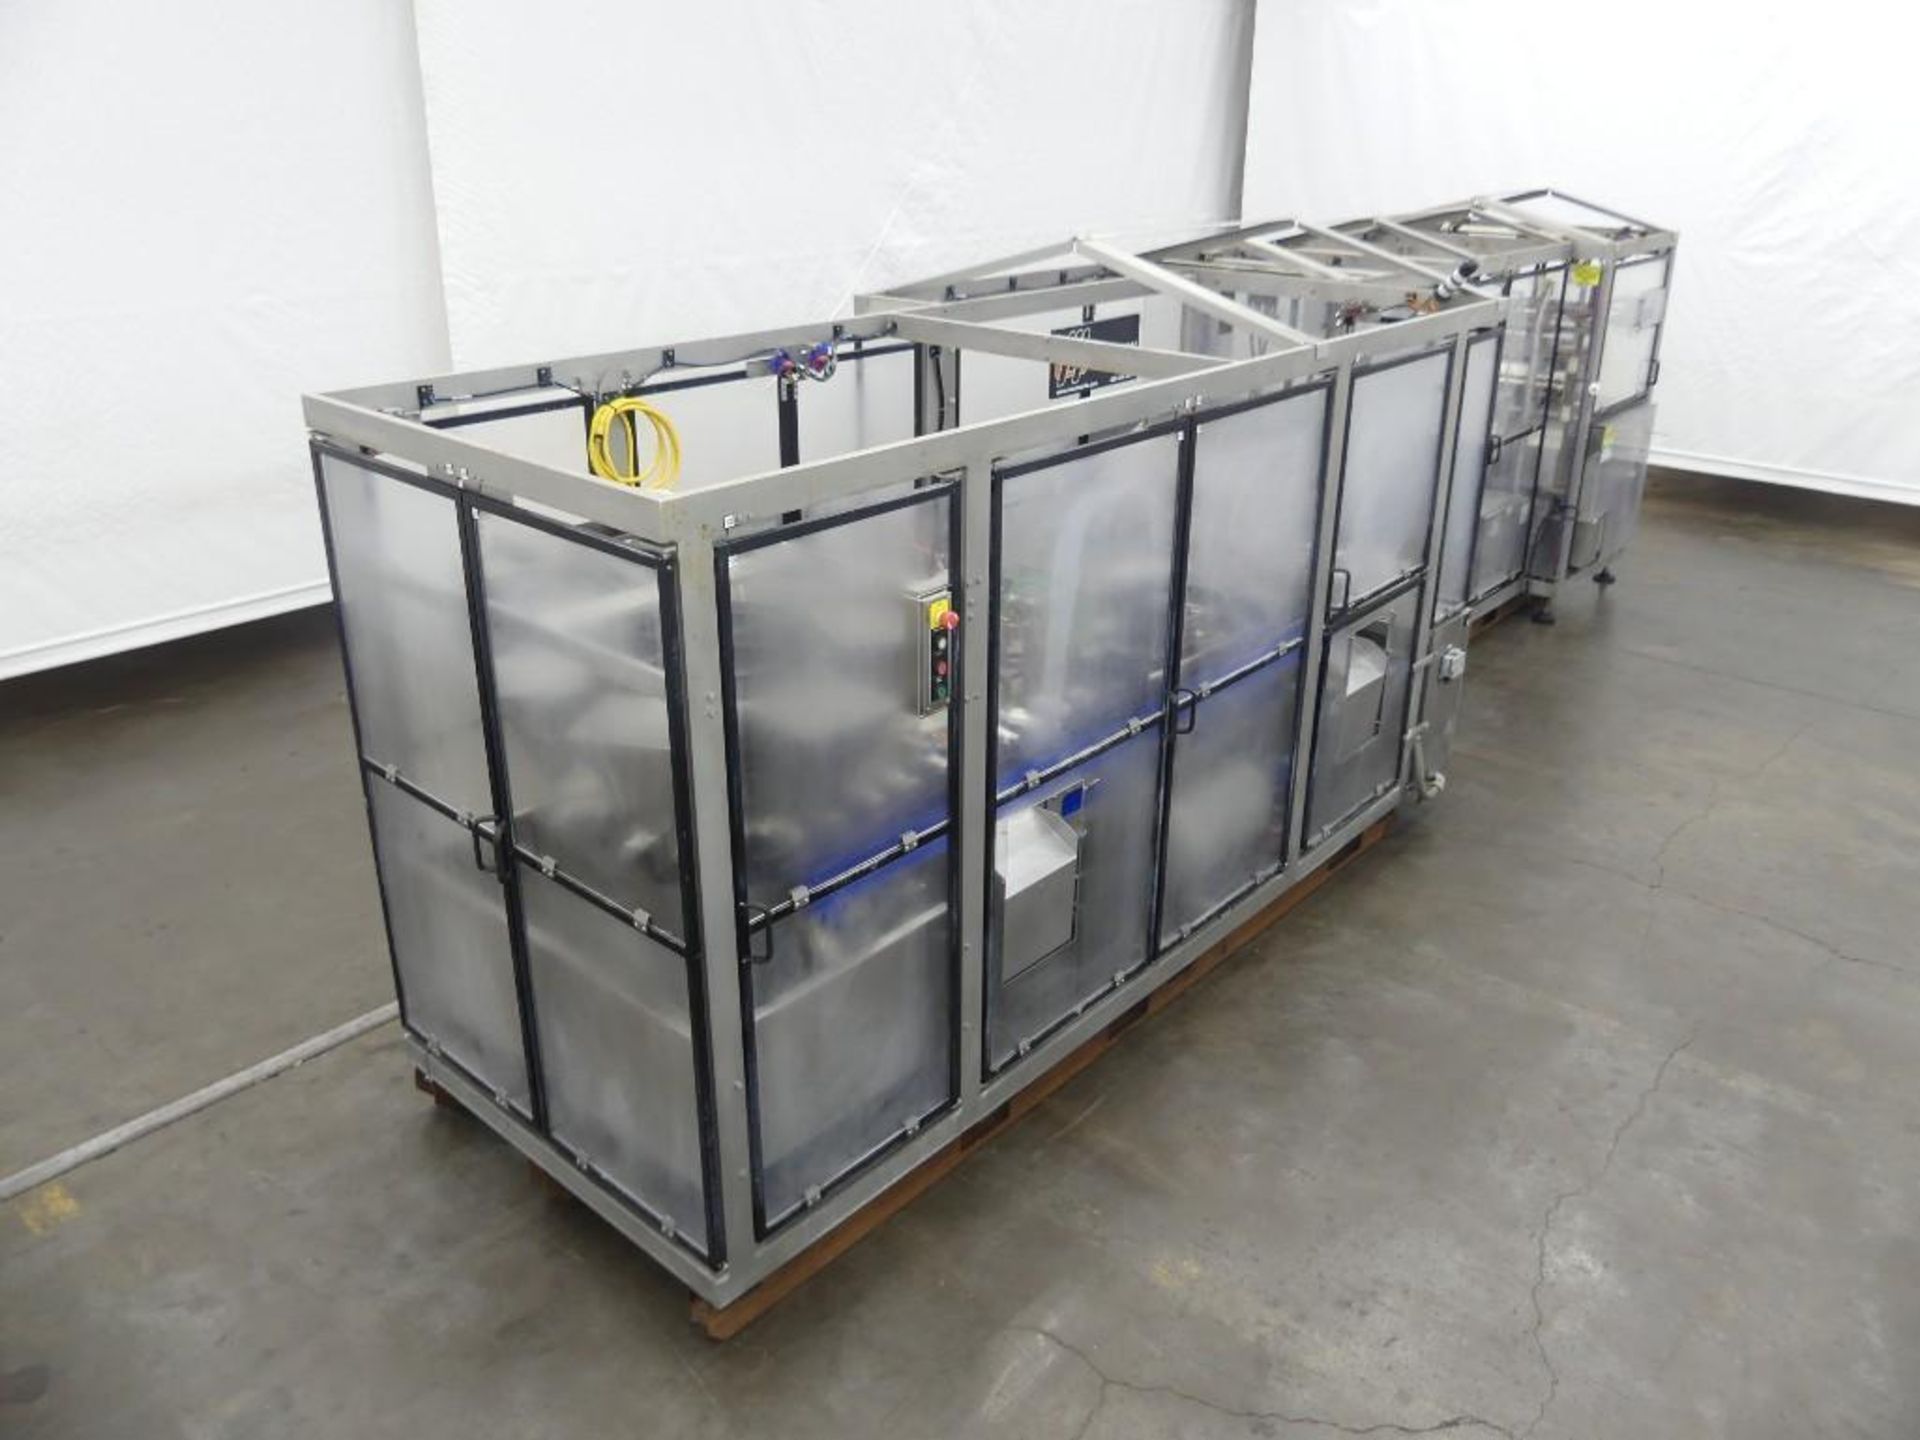 Massman HFFS-IM1000 Flexible Pouch Packaging System - Image 5 of 127